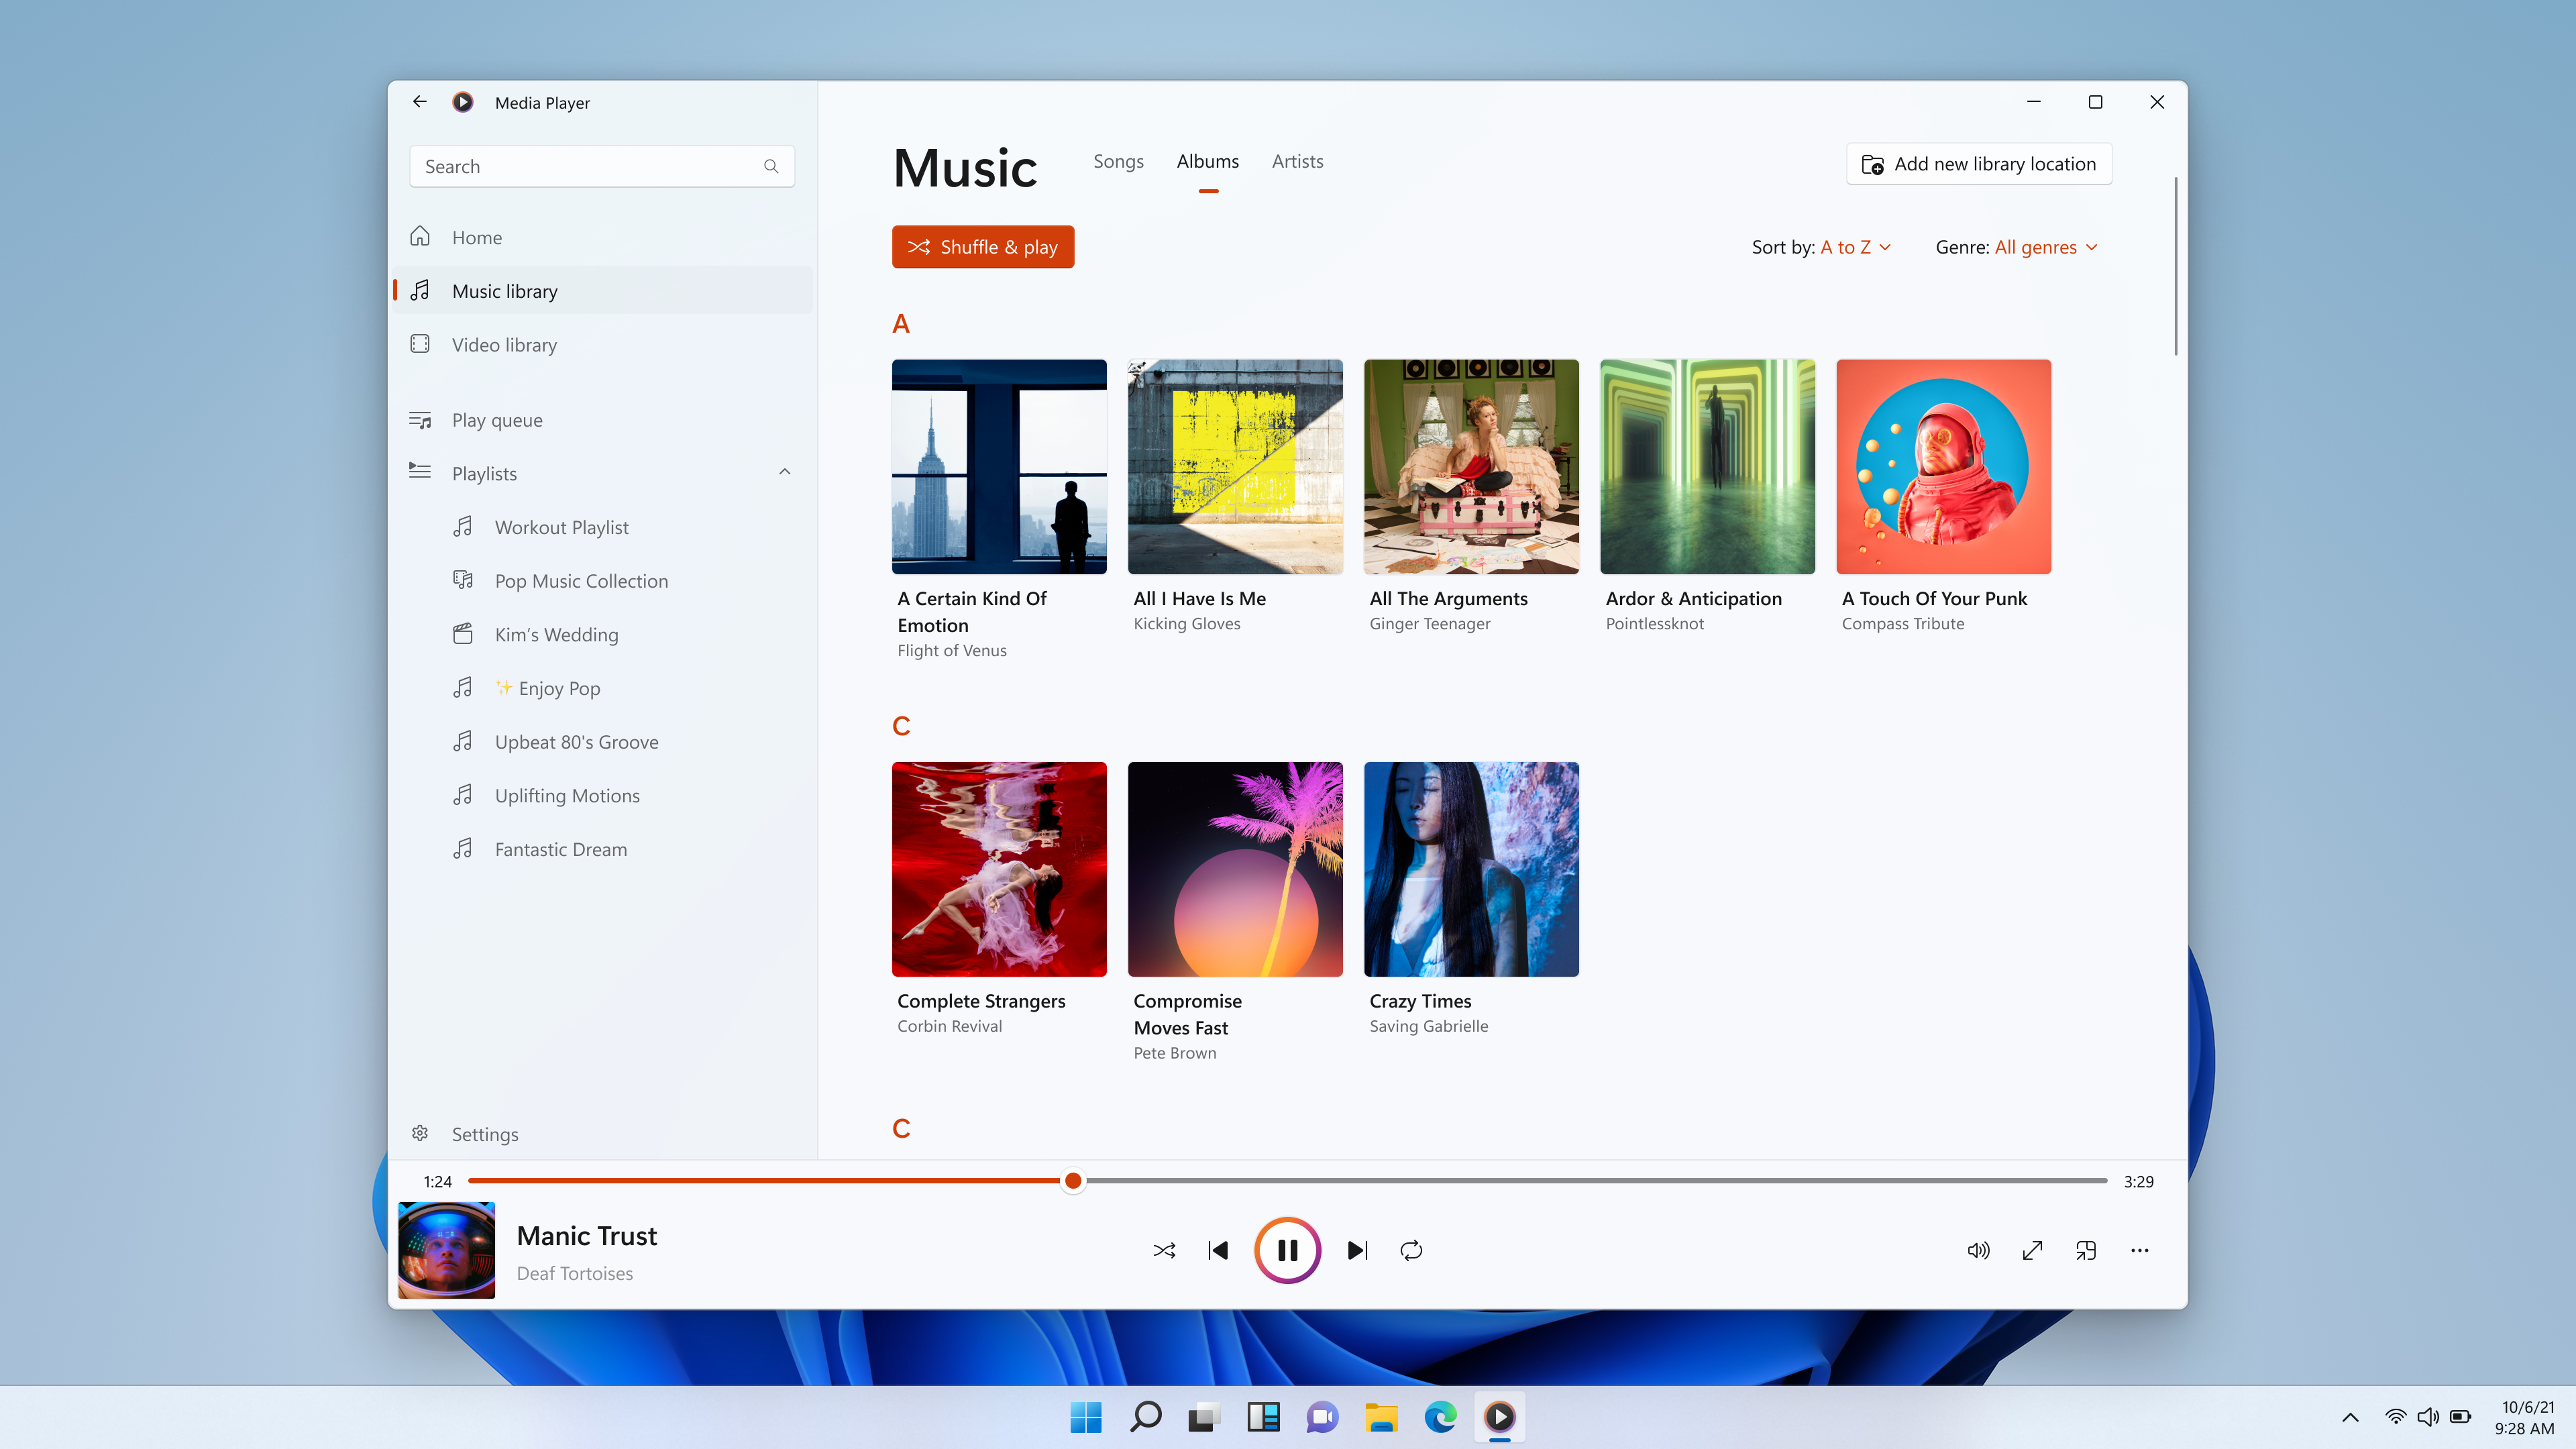 Download music windows 10 4 fold brochure template free download